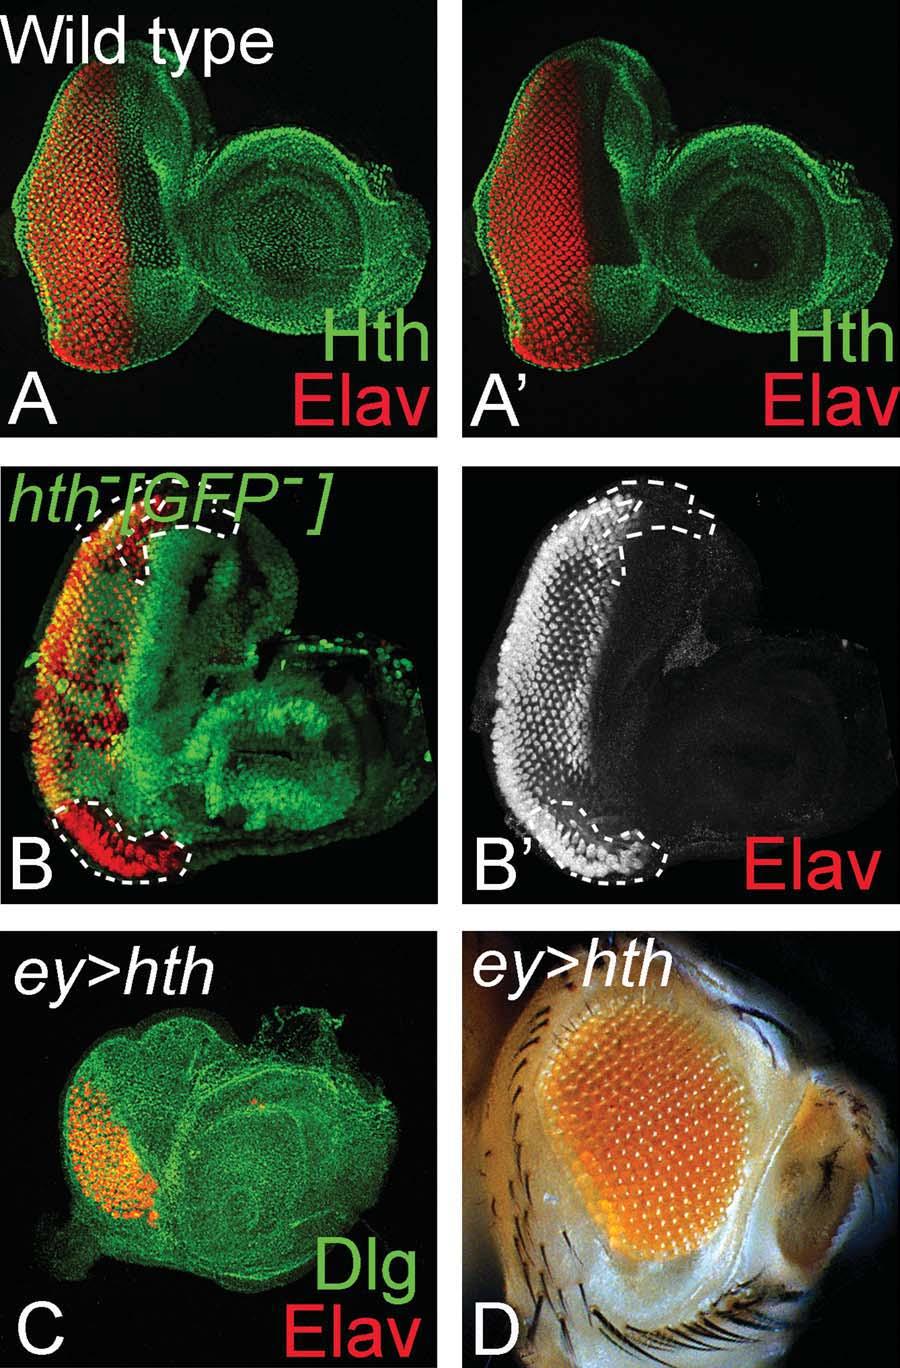 78 SINGH ET AL. (Table 1). Dl is preferentially expressed in the dorsal domain of eye imaginal discs during first- and second-instar stages.